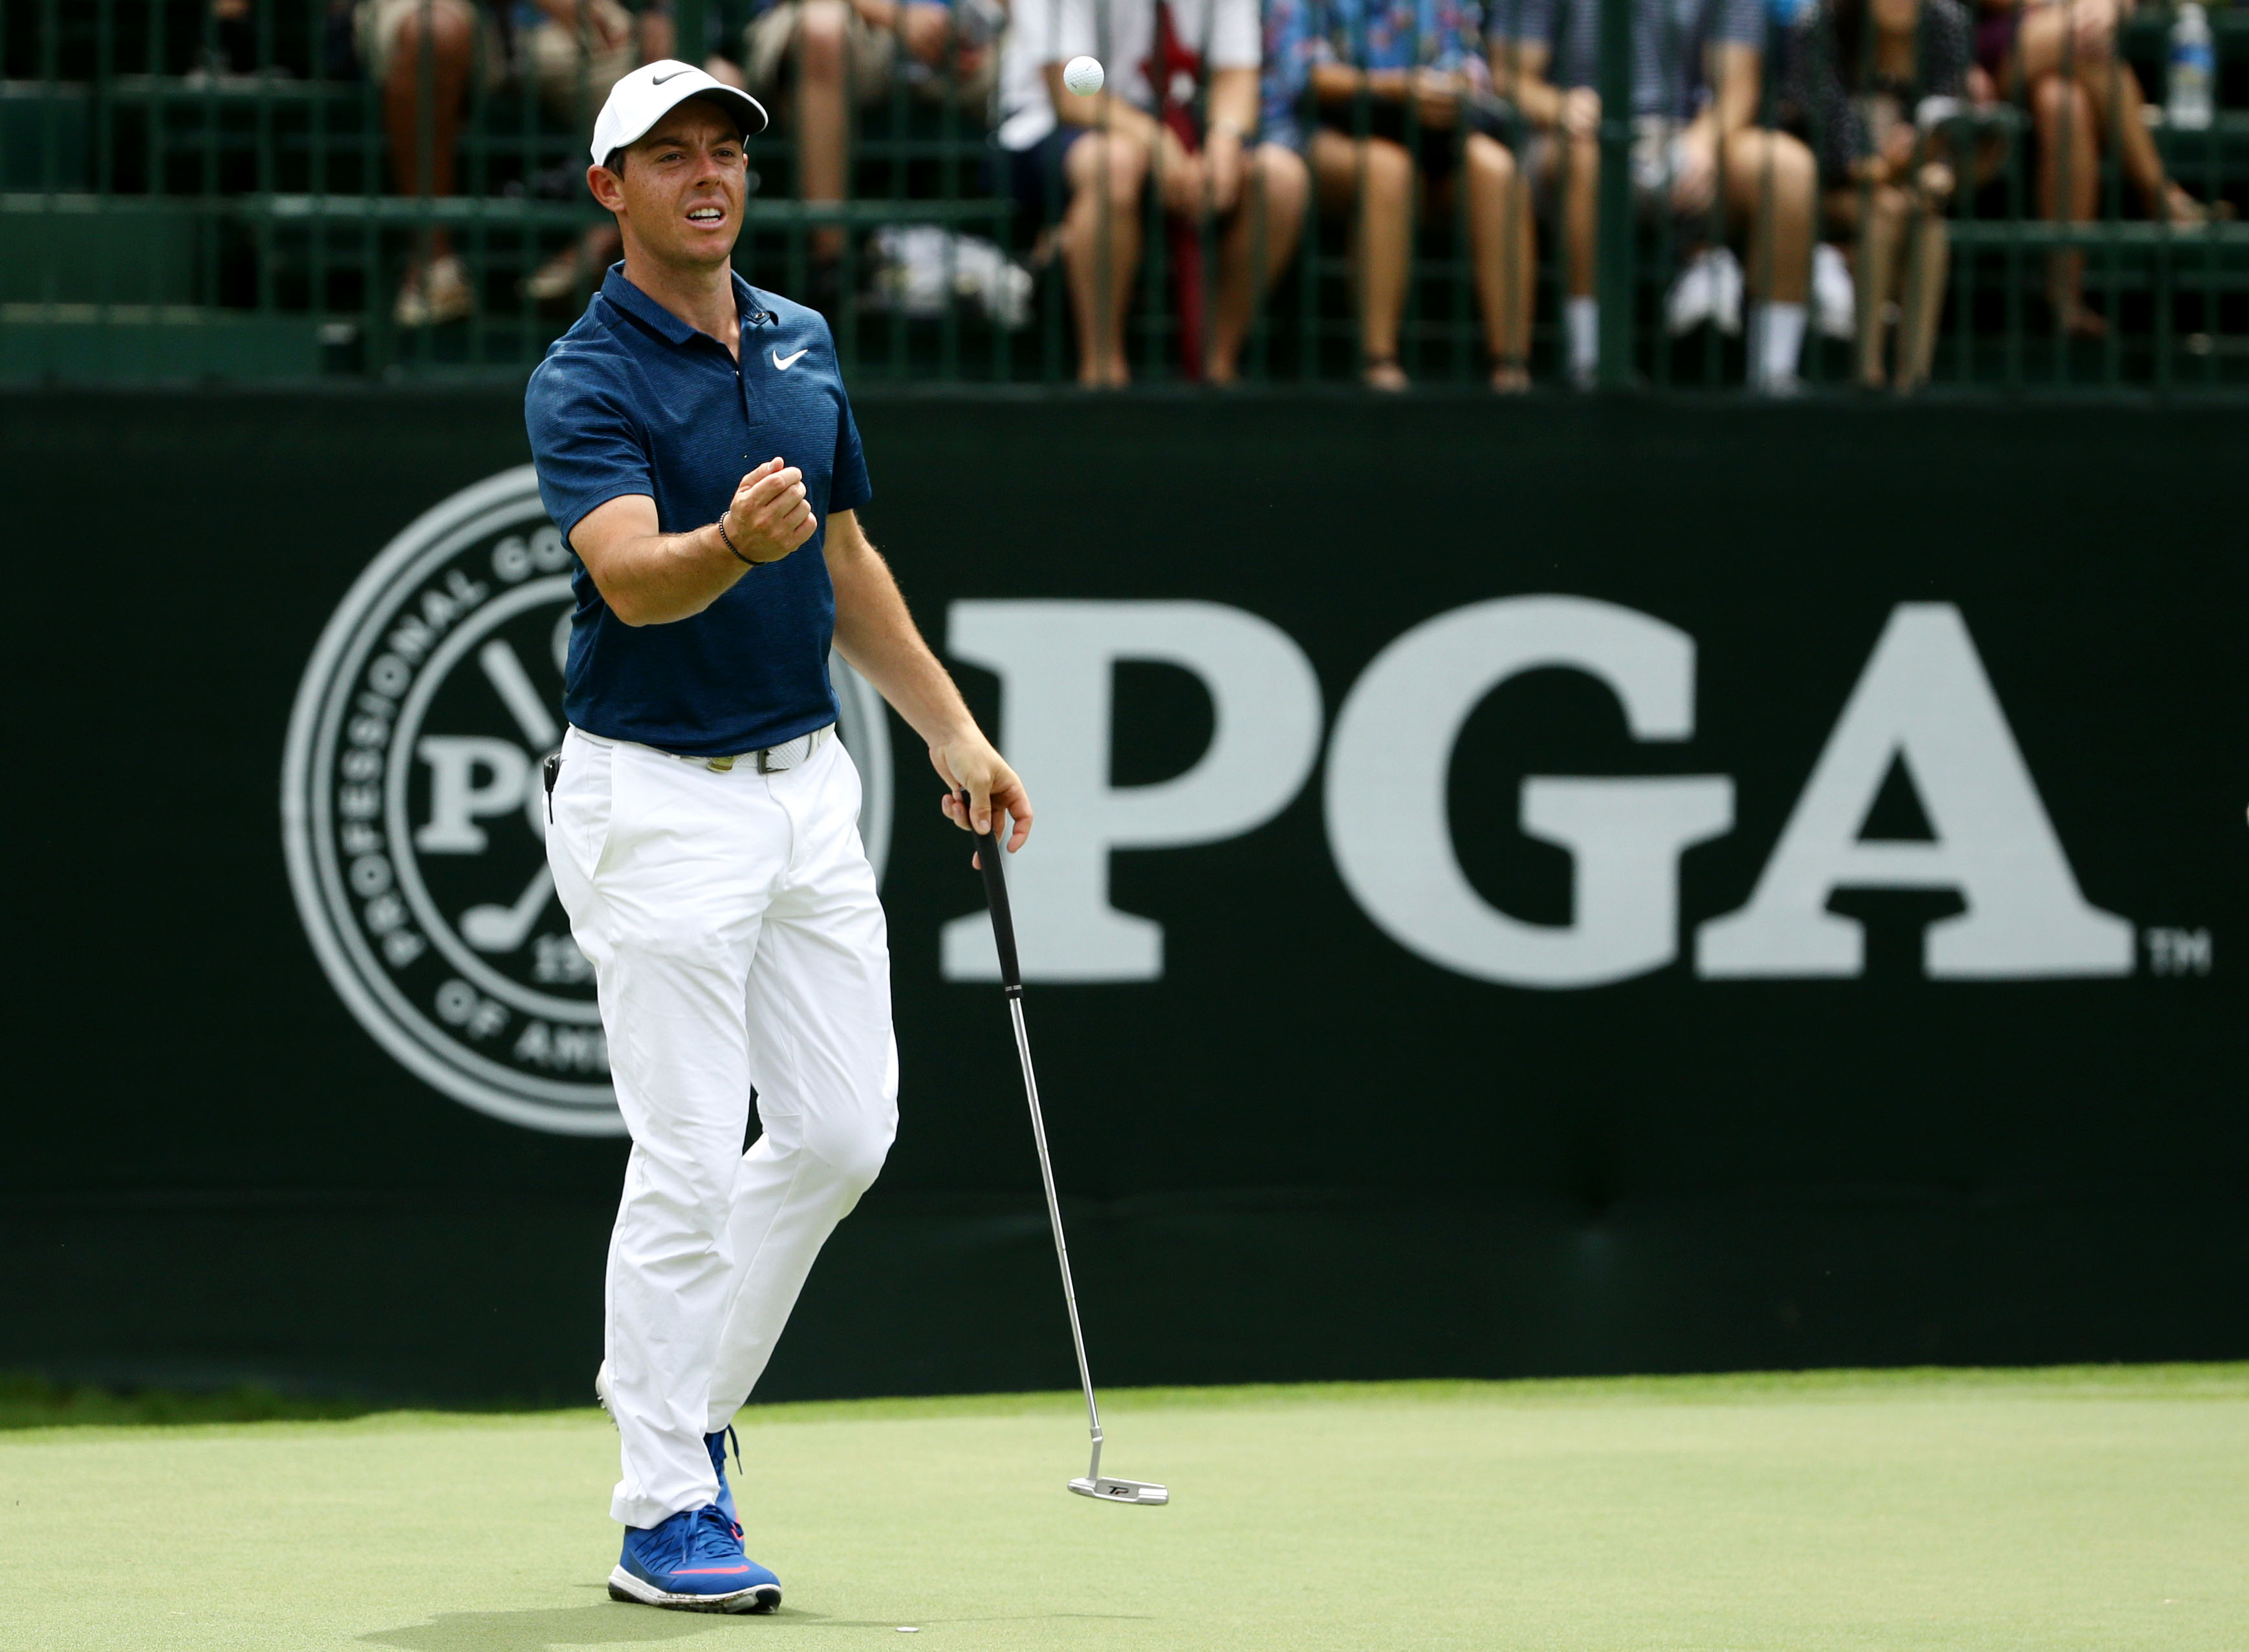 Rory McIlroy seems to have sights set on next year's Masters Tournament